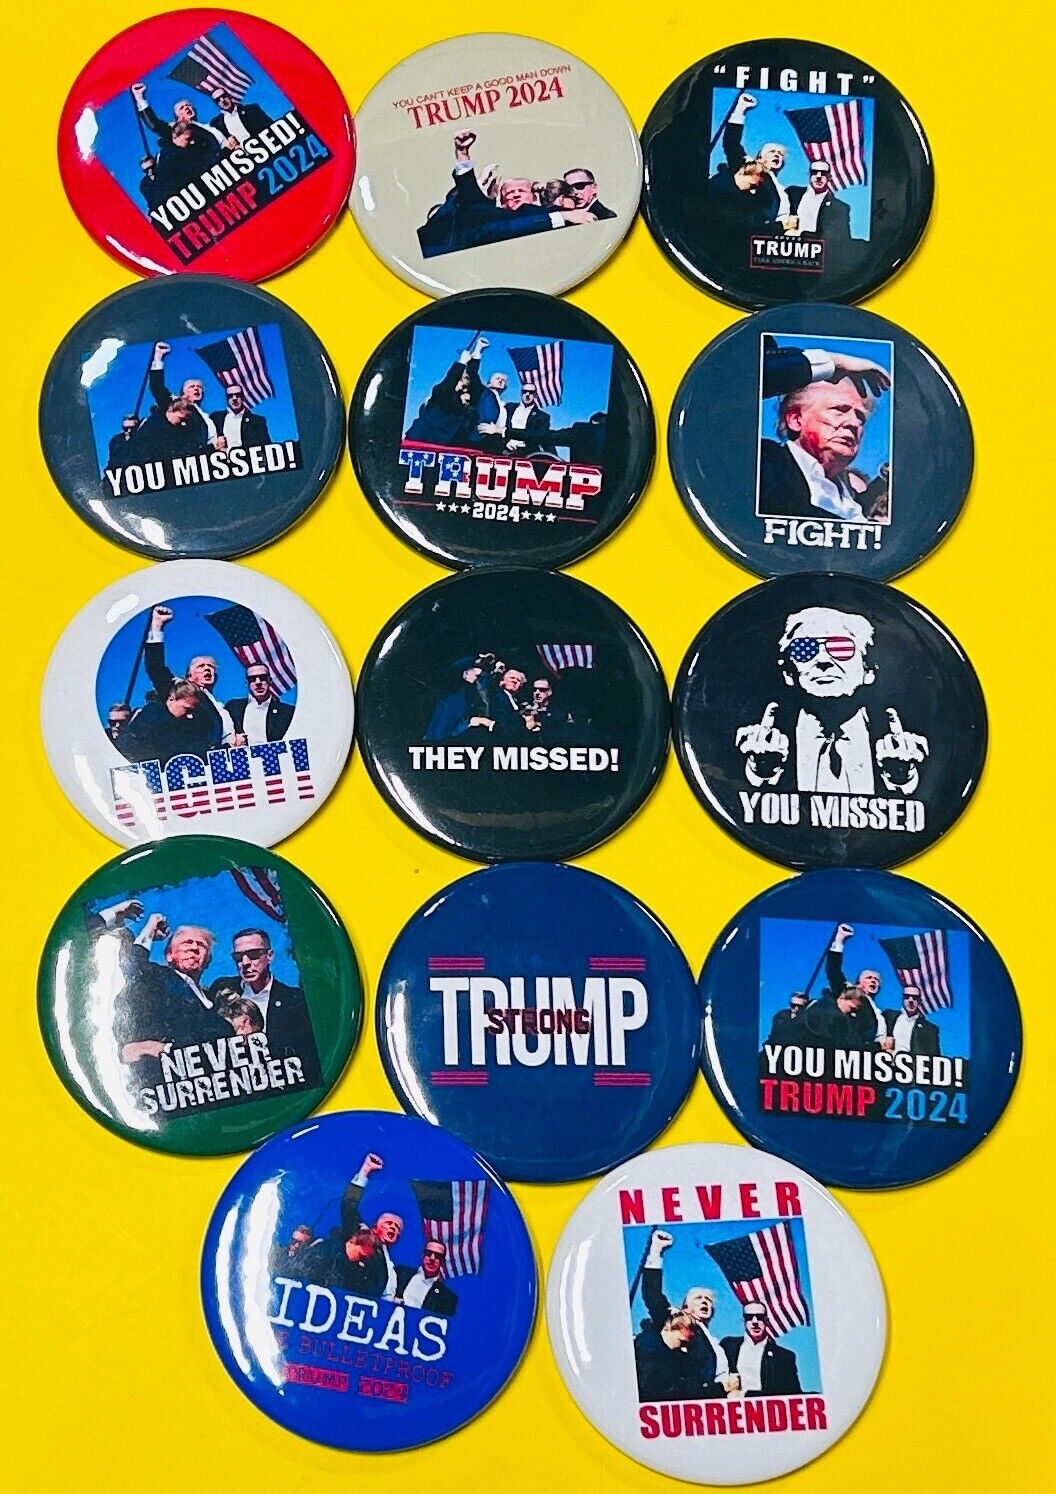 Trump Shot Rally Assassination Bulletproof 2024 Campaign 14 Different Buttons